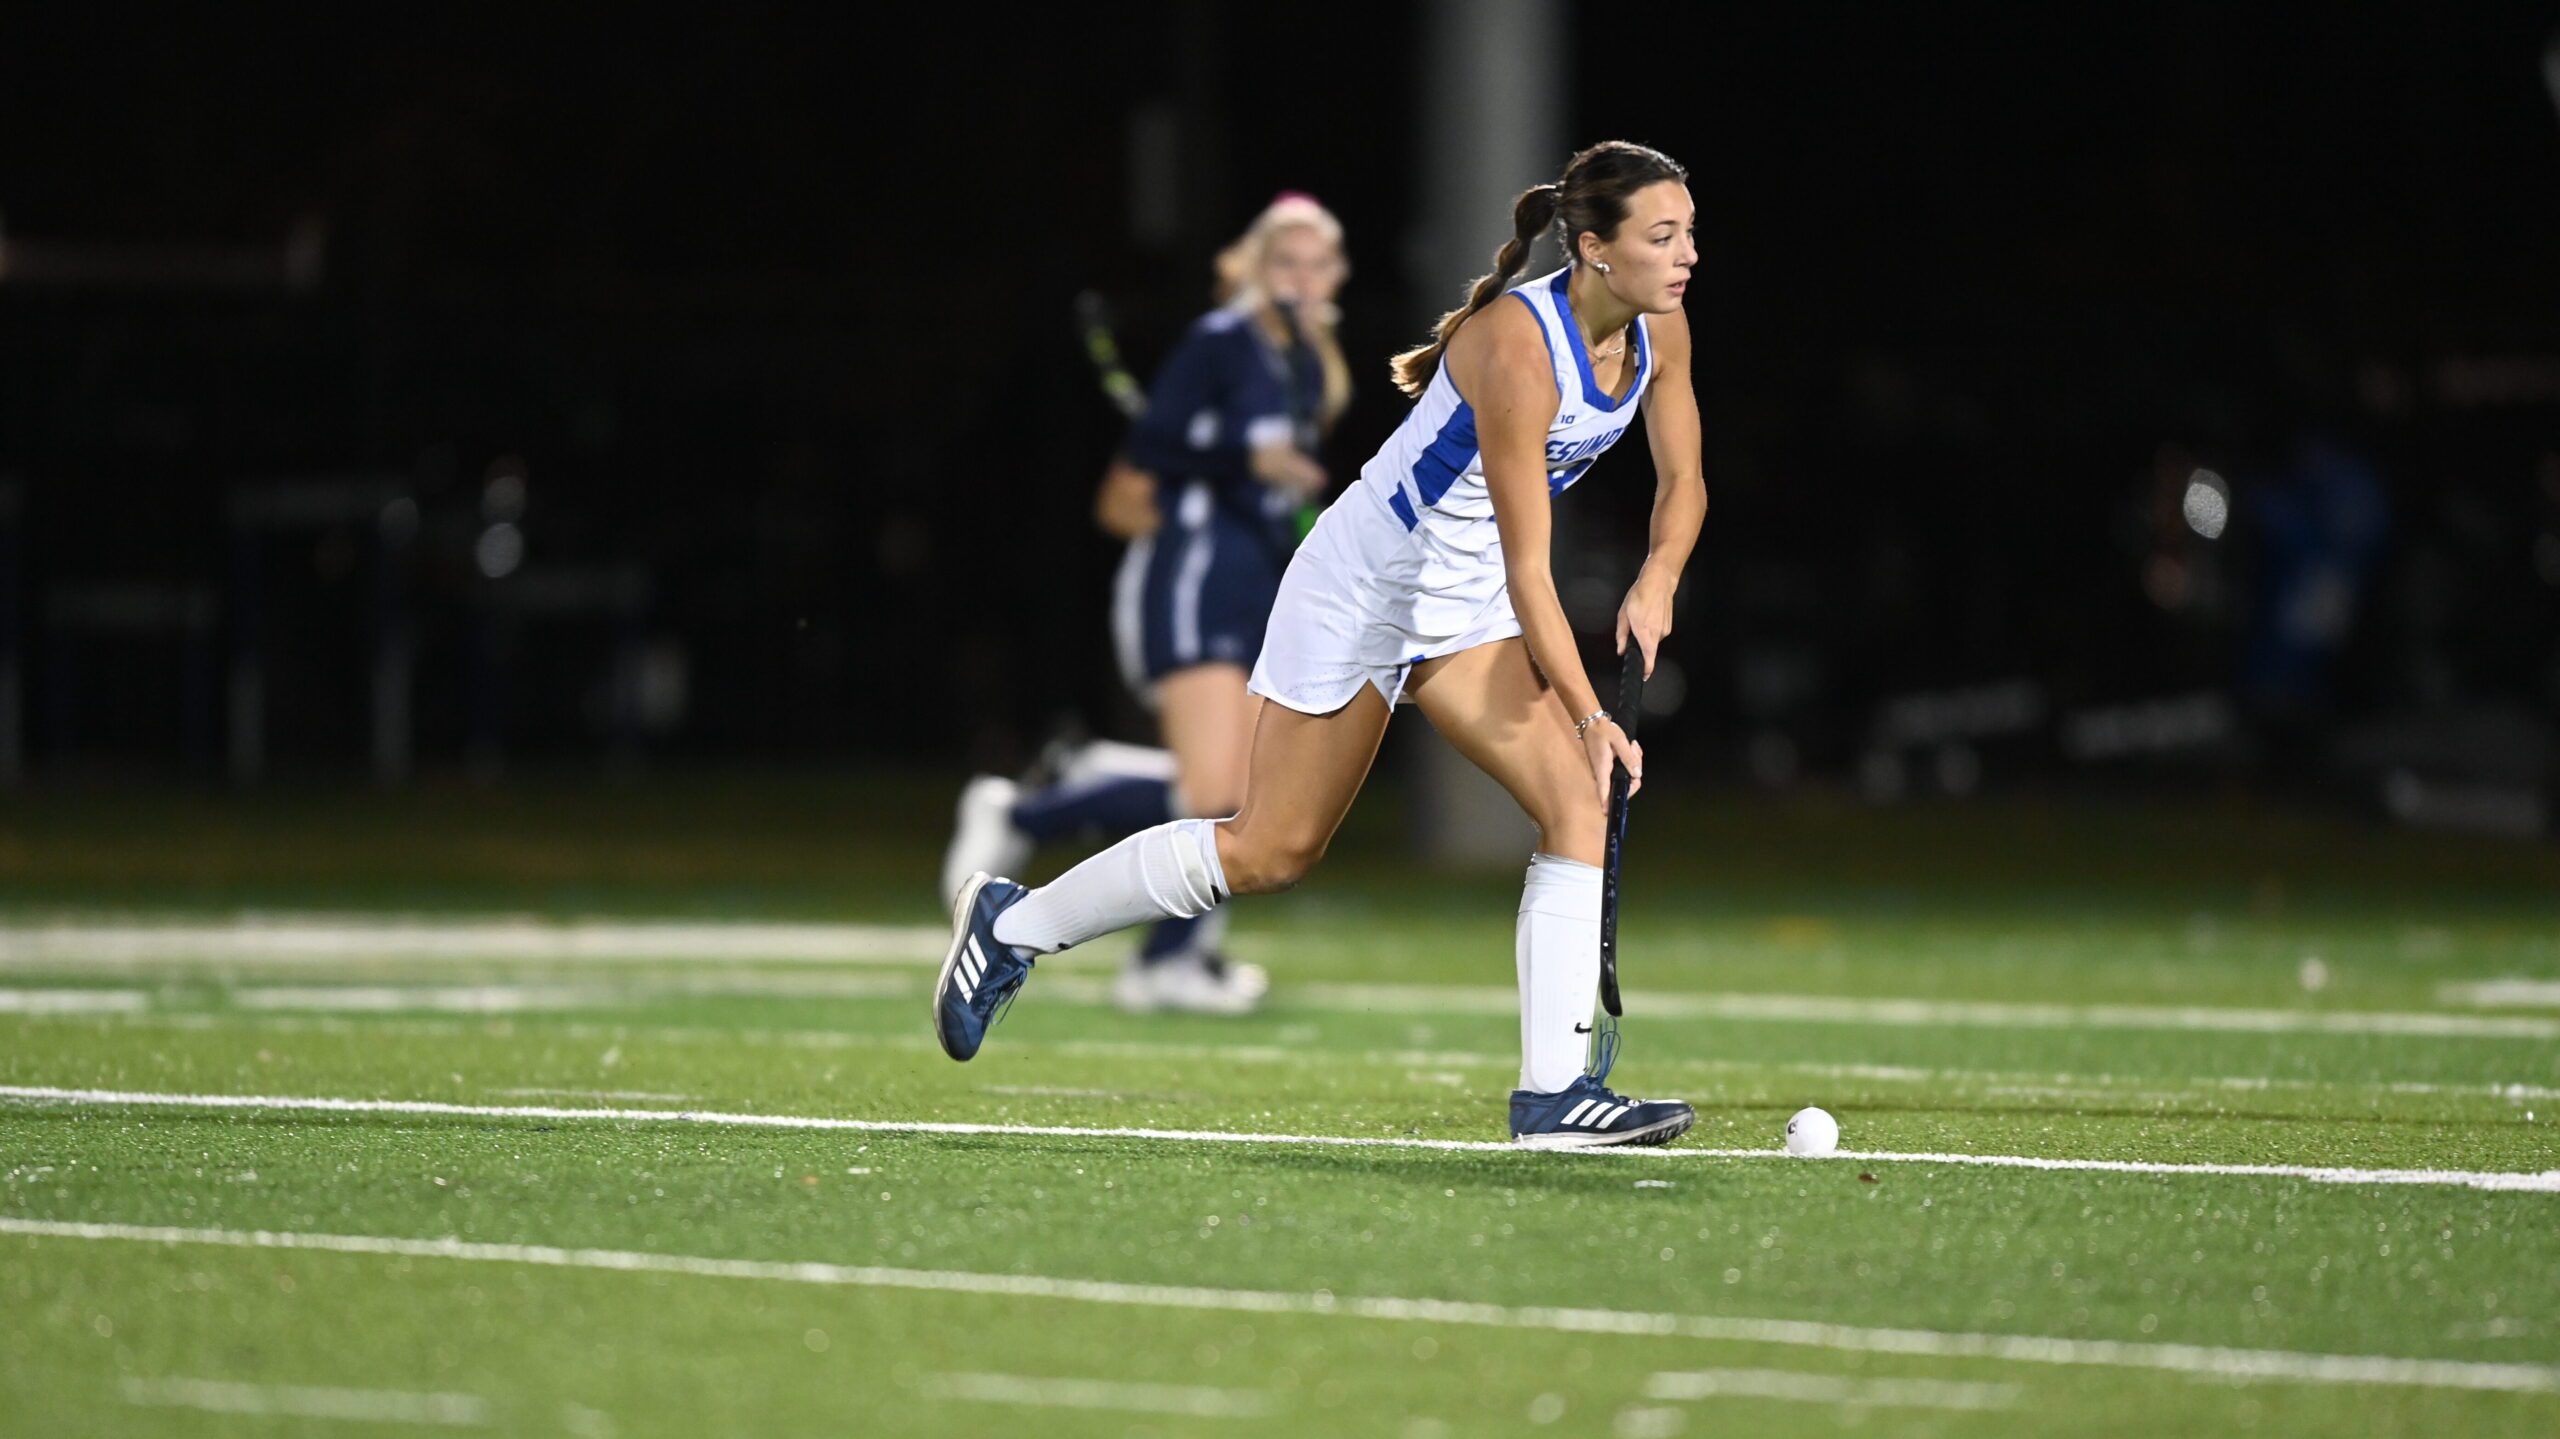 Assumption University student-athlete competes in a field hockey game